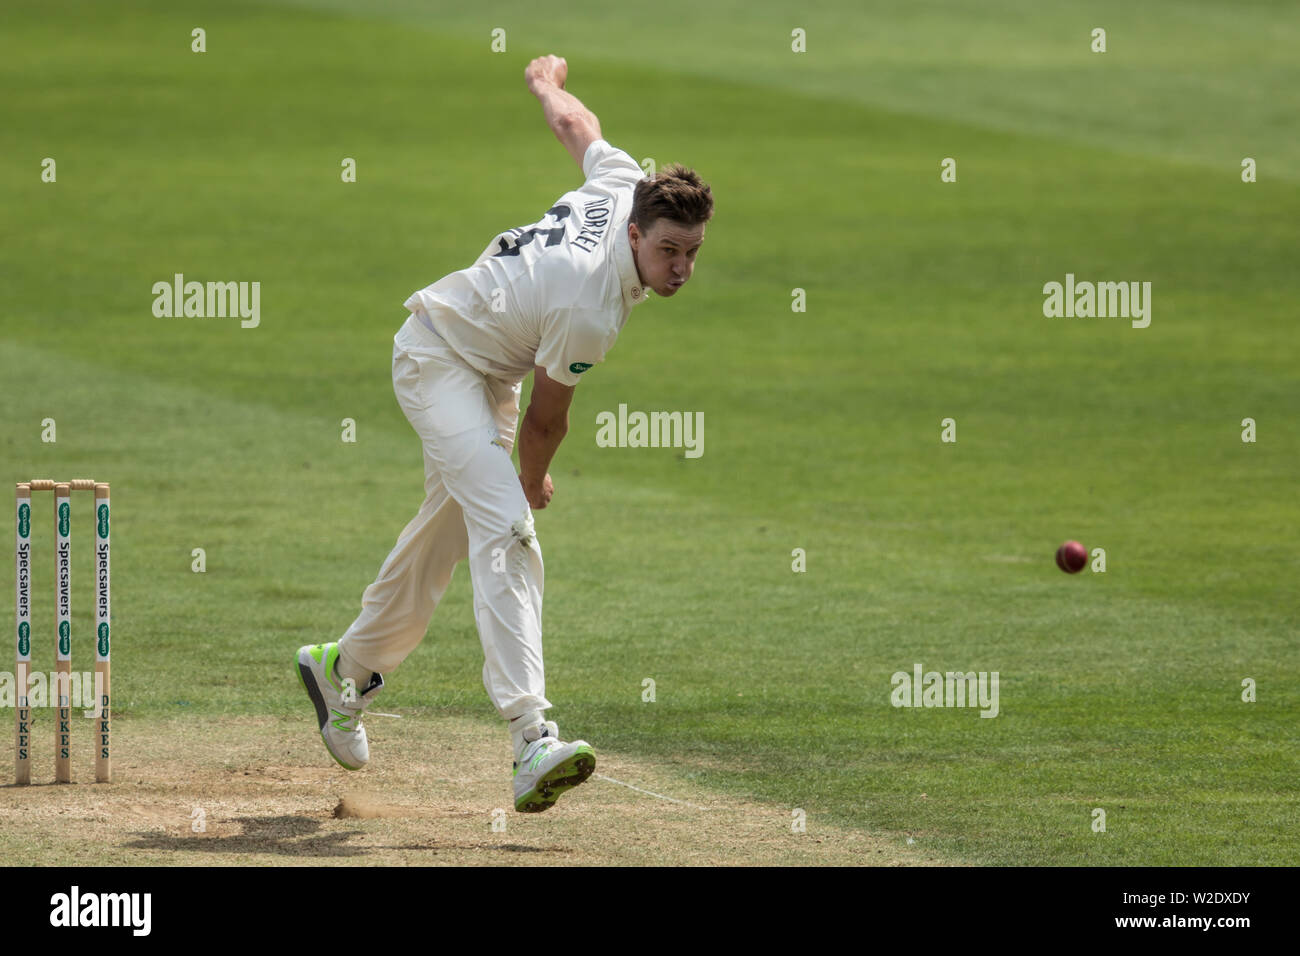 London, UK. 8th July, 2019. Morne Morkel bowling for Surrey against Kent on day two of the Specsavers County Championship game at the Oval. Credit: David Rowe/Alamy Live News Stock Photo